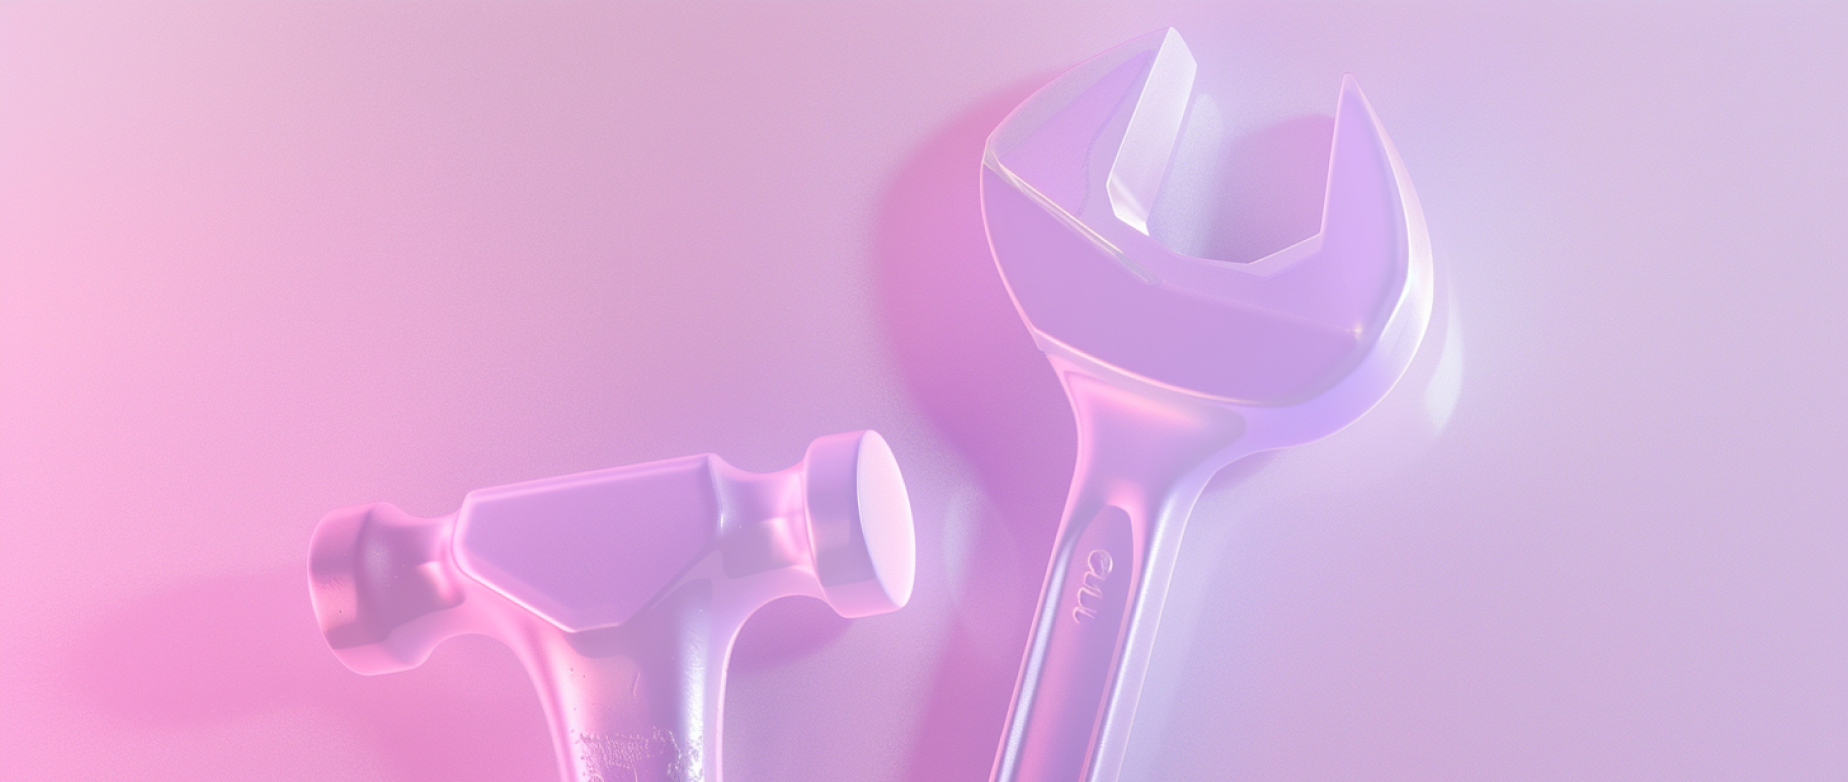 A hammer and wrench on a pink background.